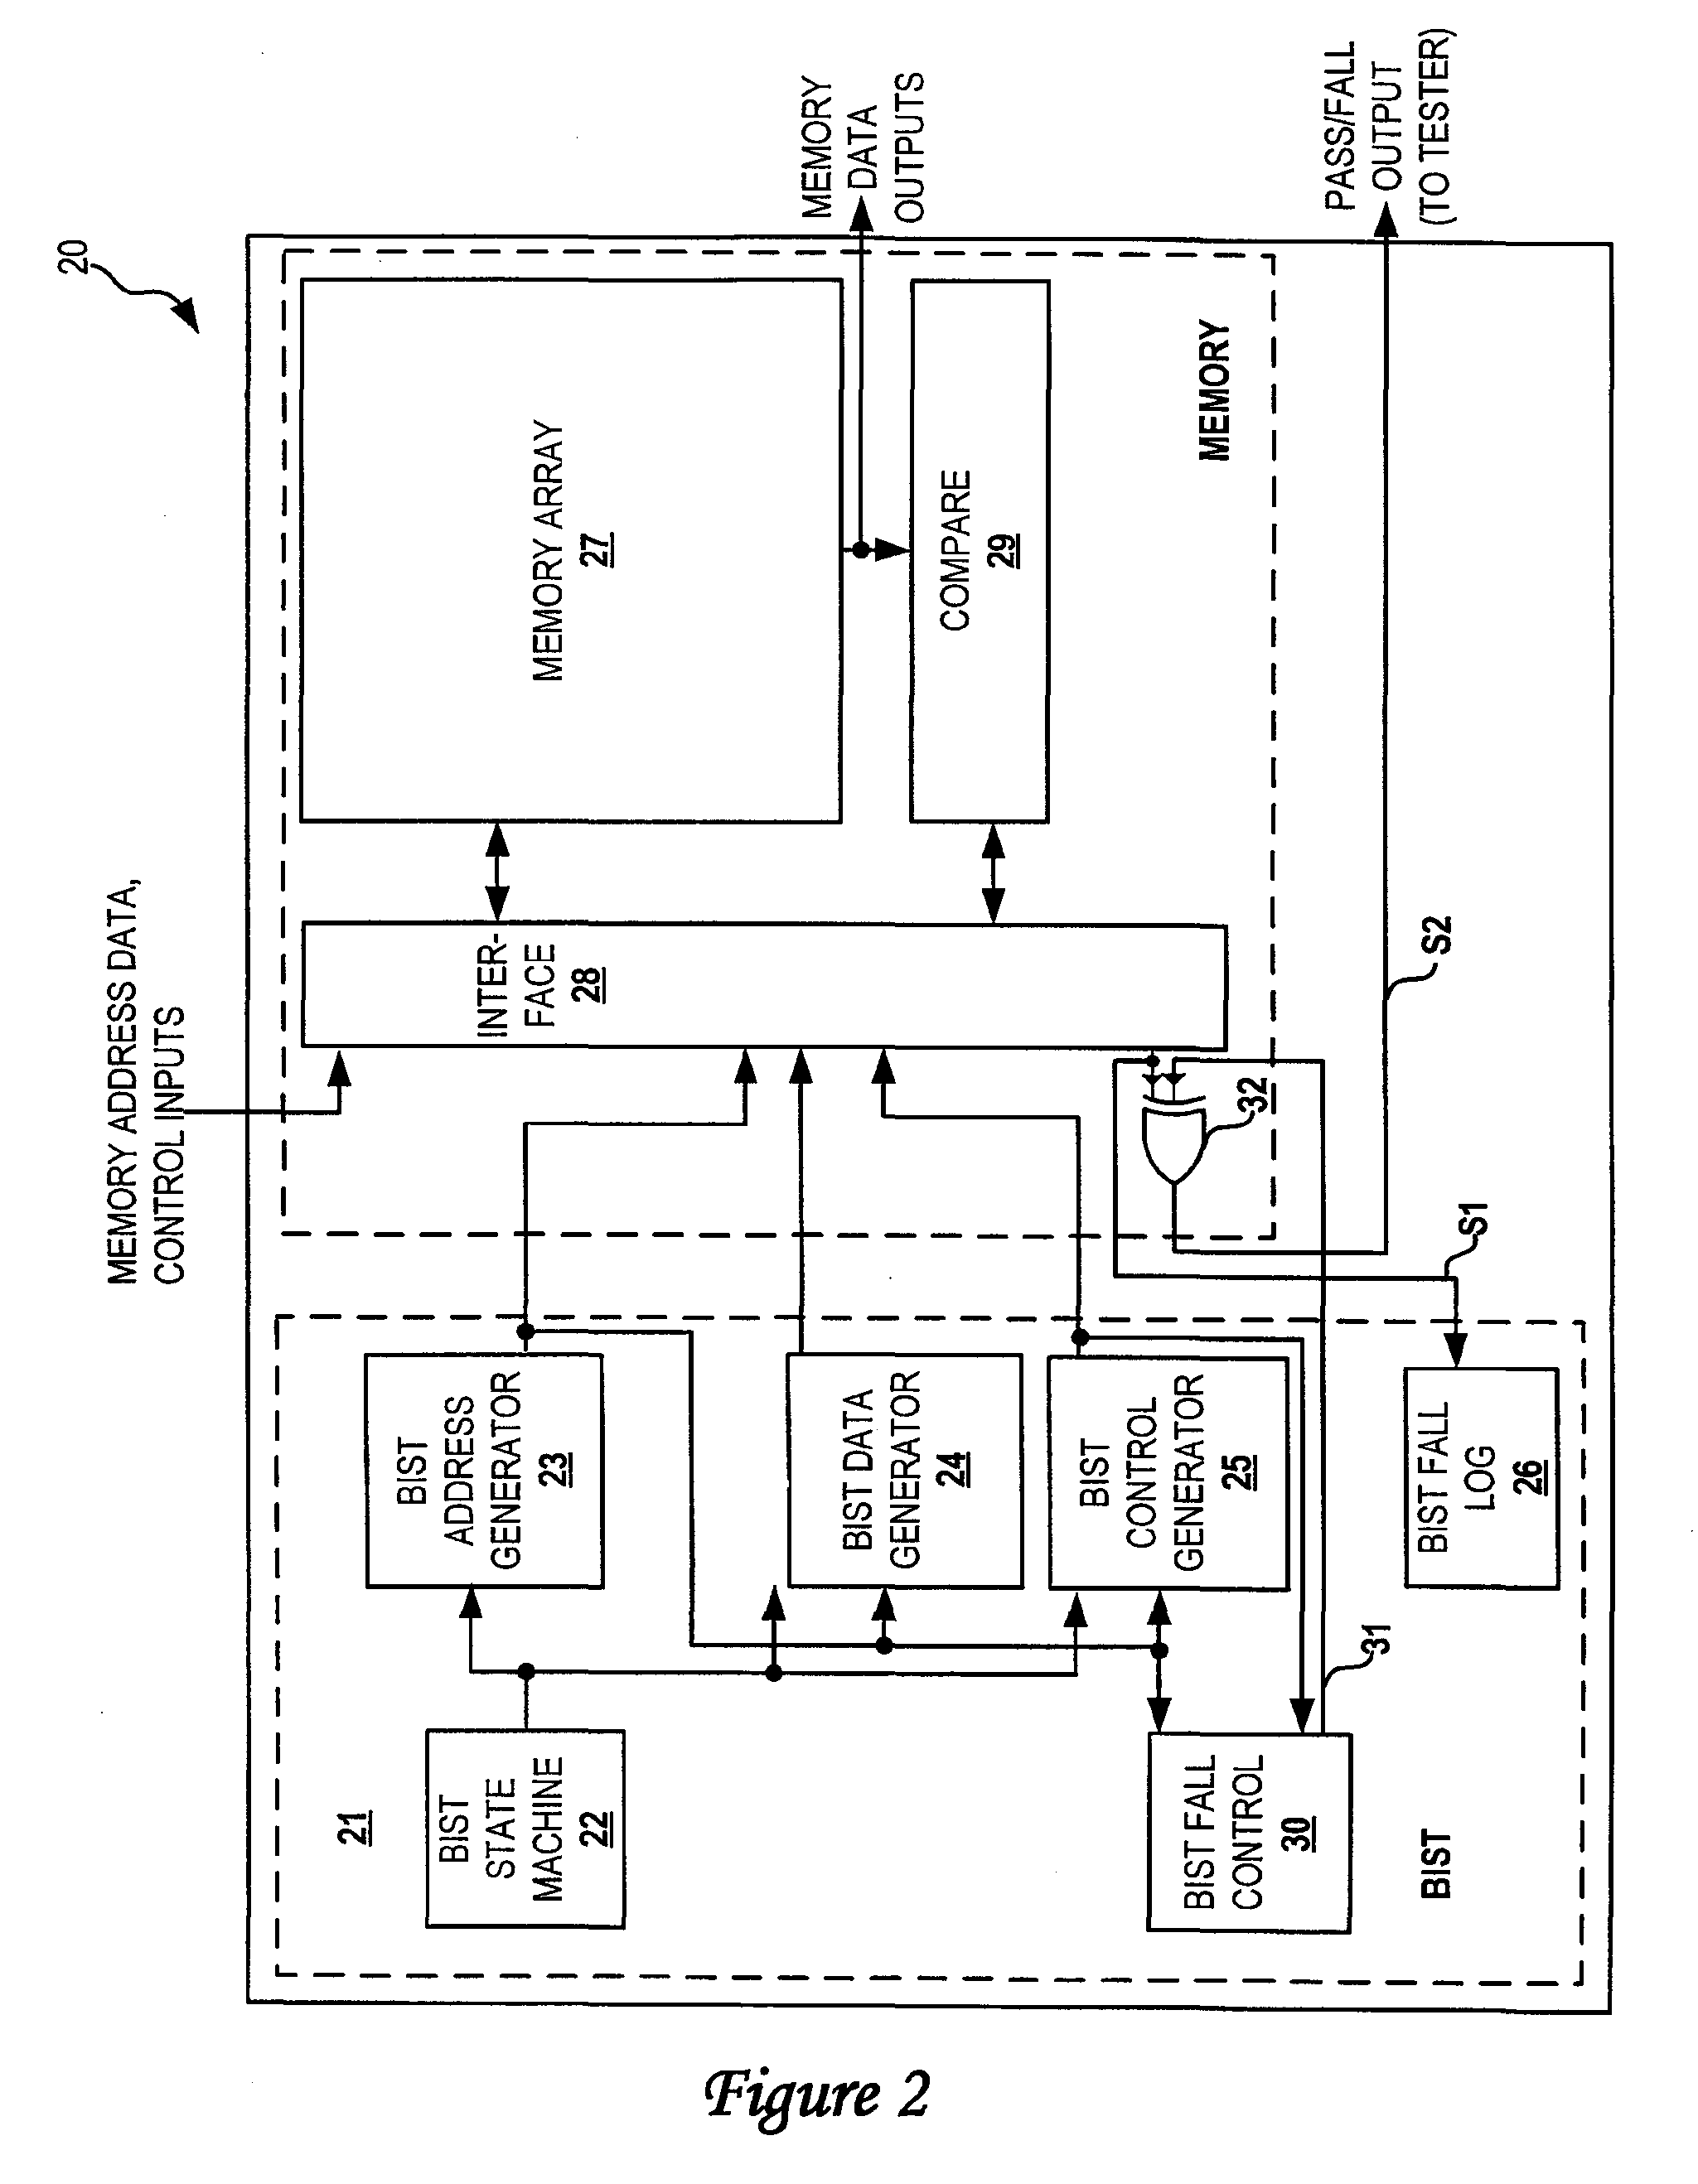 Method and apparatus for verifying memory testing software